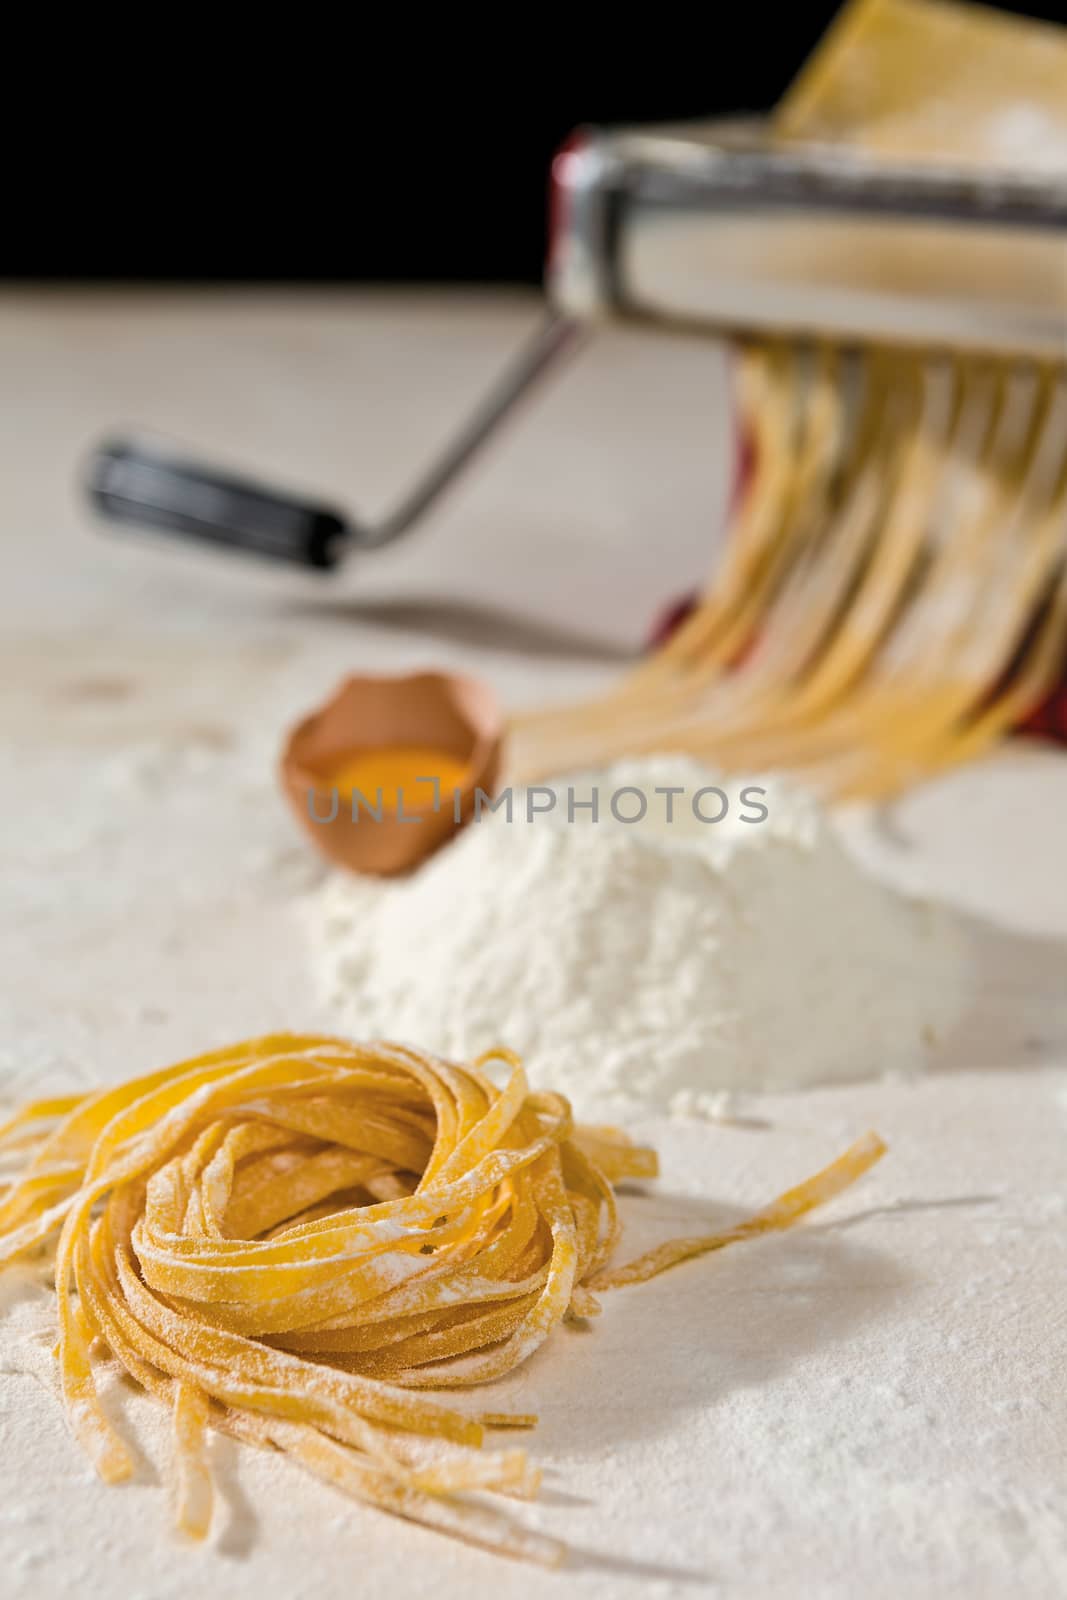 Tagliatelle pasta and its ingredients with machine pasta cutter on background